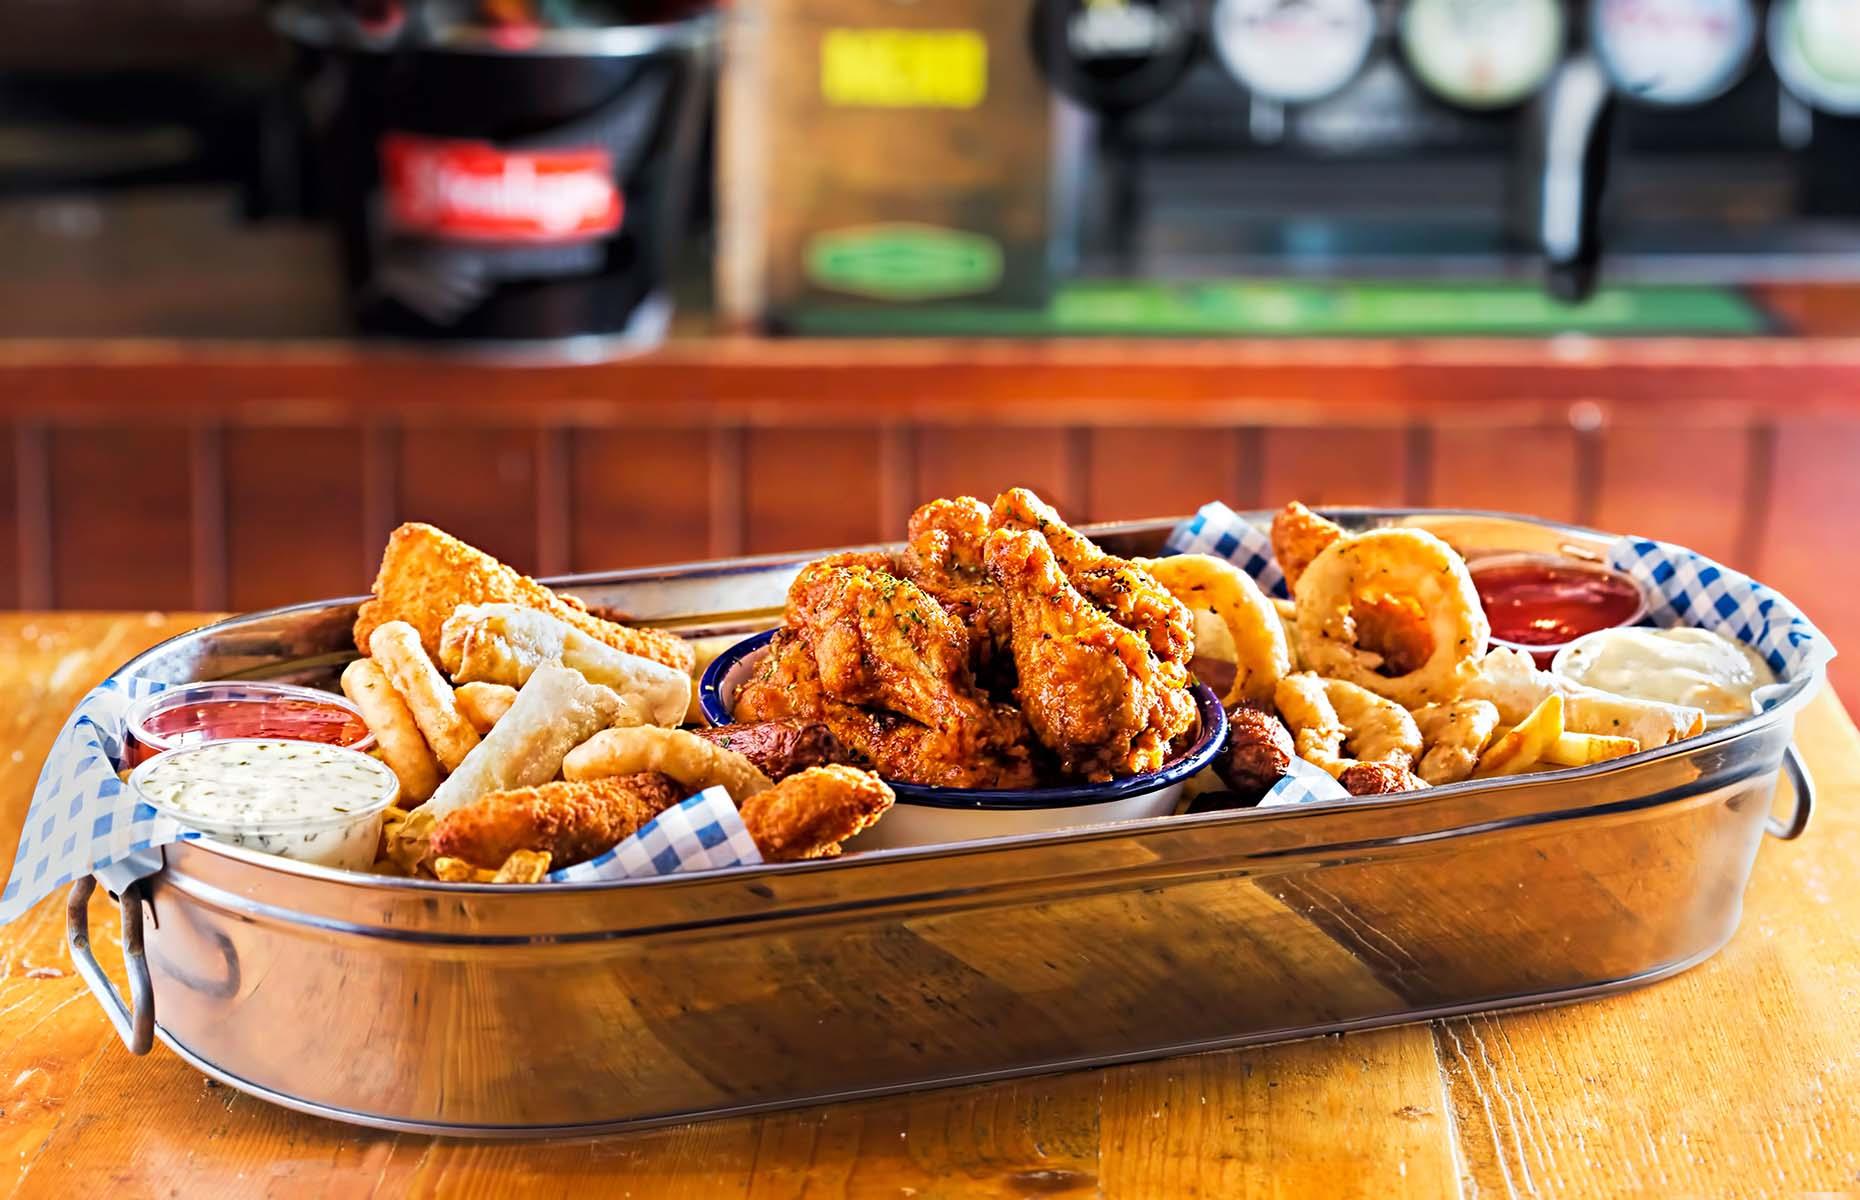 <p>Sometimes, only fried food will do! Cover your board with baking paper and go crazy with the snacks: fries, mozzarella sticks, onion rings, boneless wings, halloumi fries… you can even use an air fryer to make it easier. Serve it with some aioli or dipping sauce, and a selection of cold beers.</p>  <p><a href="https://www.lovefood.com/recipes/110031/golden-oven-fries-recipe"><strong>Get the recipe for golden oven fries and turmeric dipping sauce here</strong></a></p>